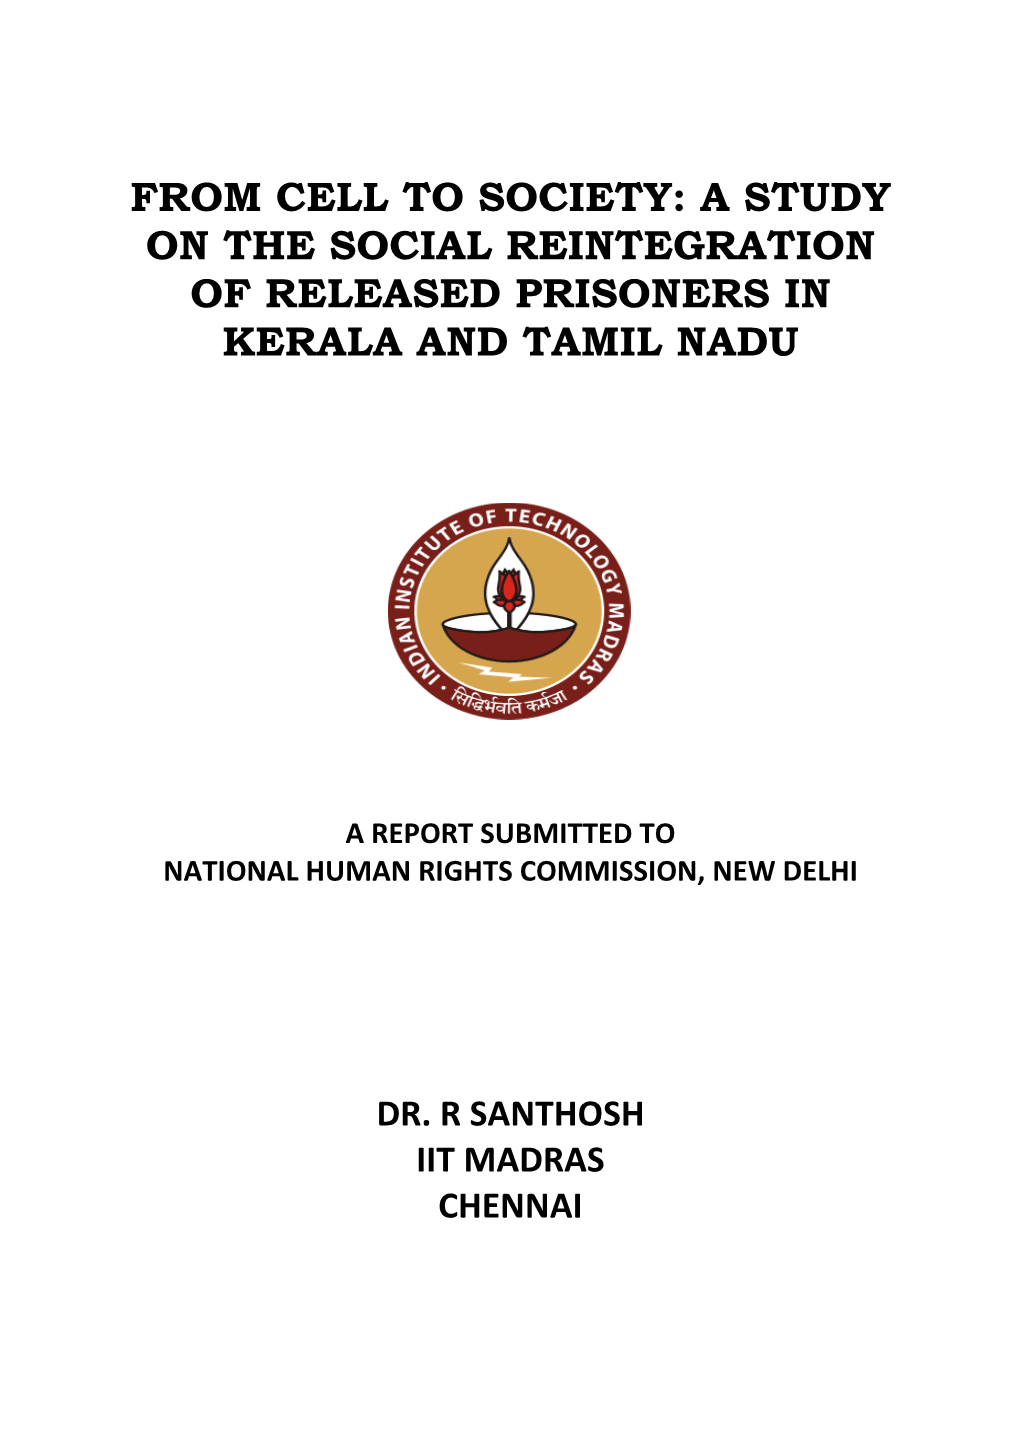 A Study on the Social Reintegration of Released Prisoners in Kerala and Tamil Nadu